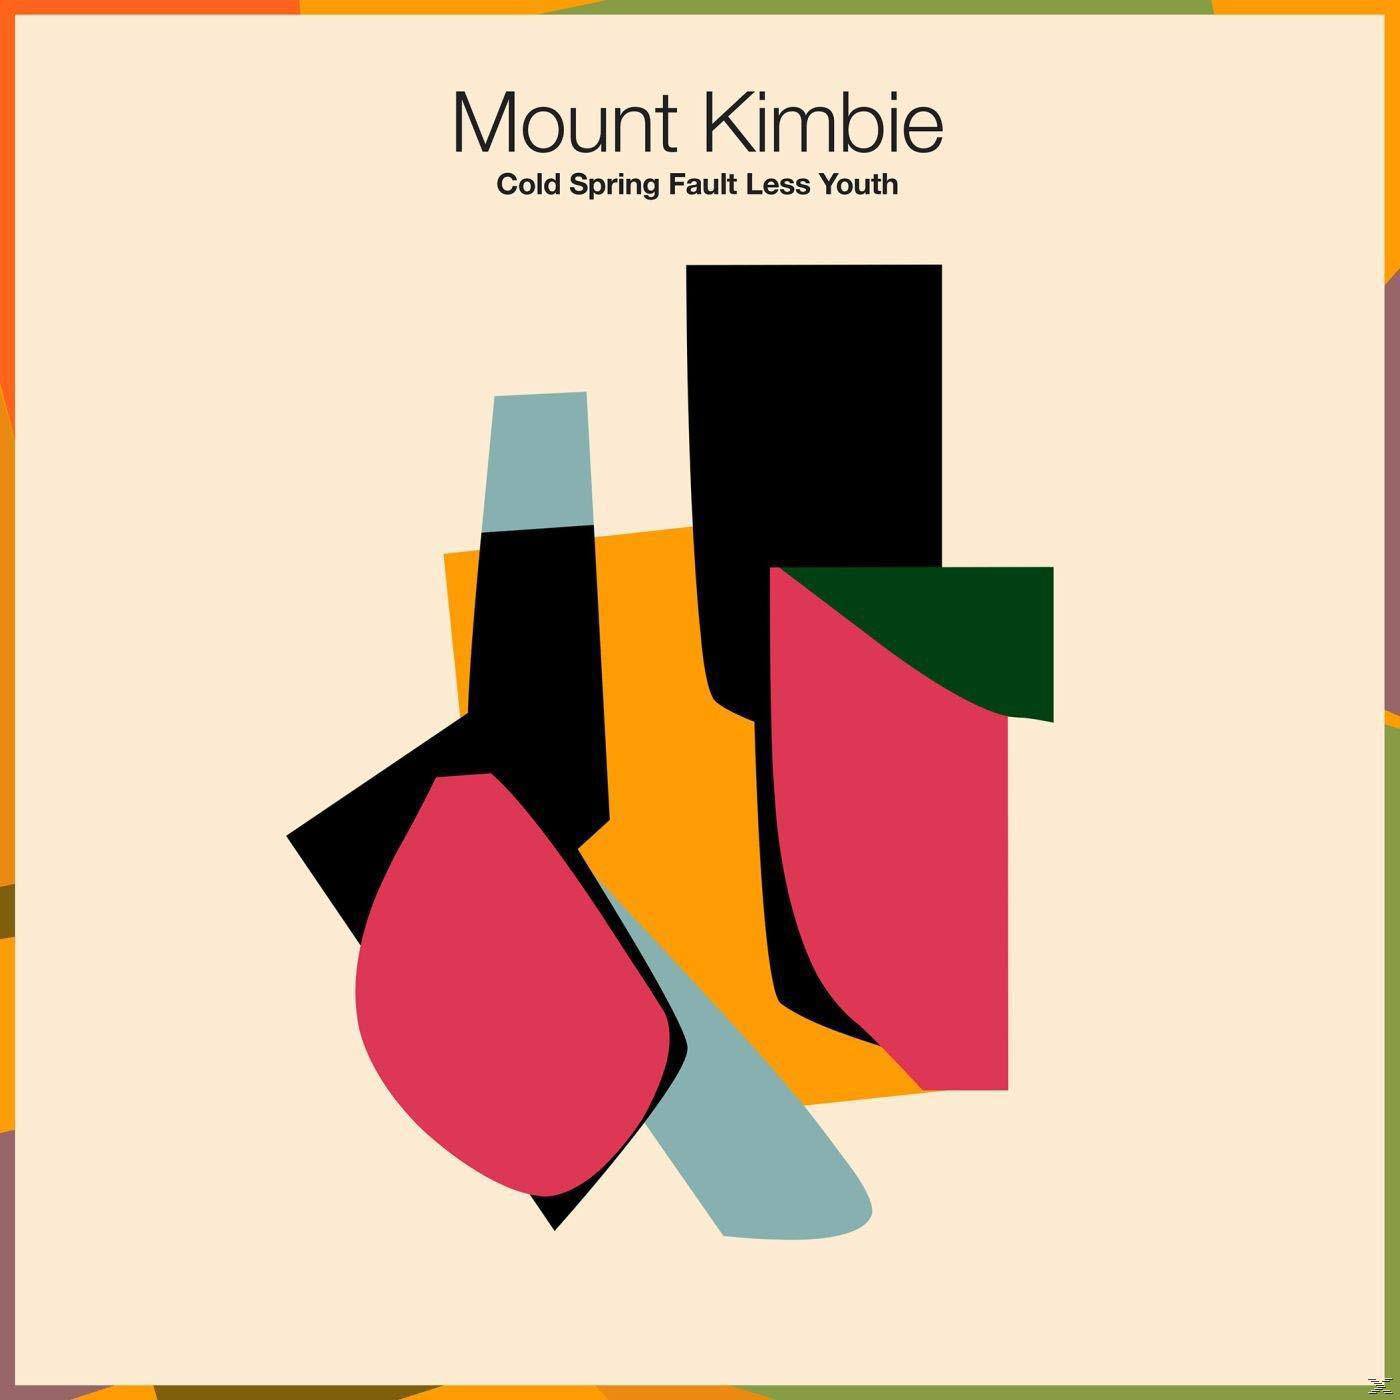 Spring Youth Cold - - Download) Less + Mount (LP Fault Kimbie